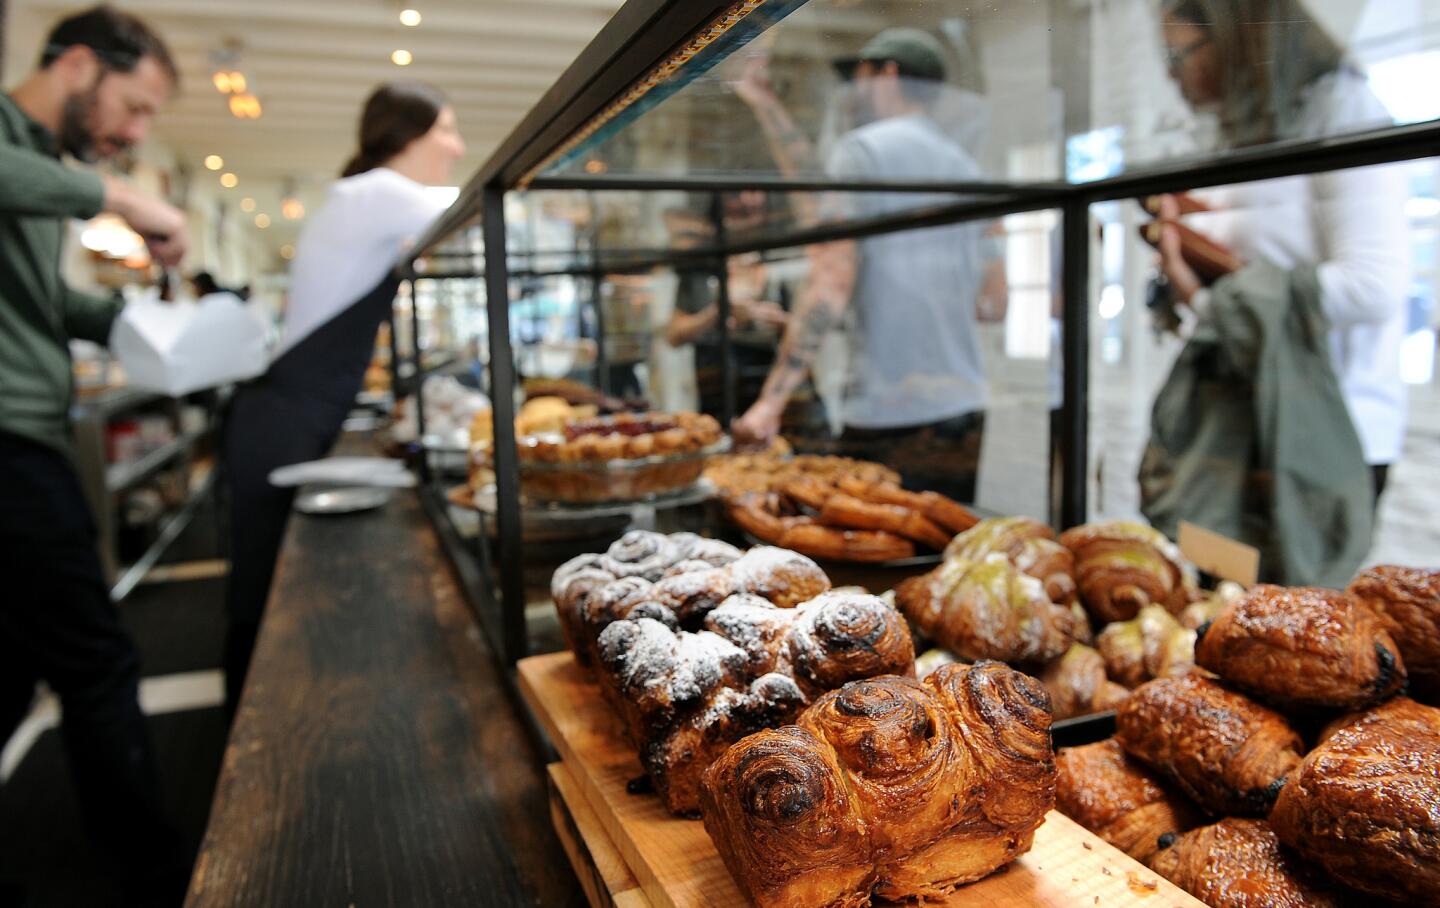 Customers check out baked goods in the display case at Gjusta in Venice.